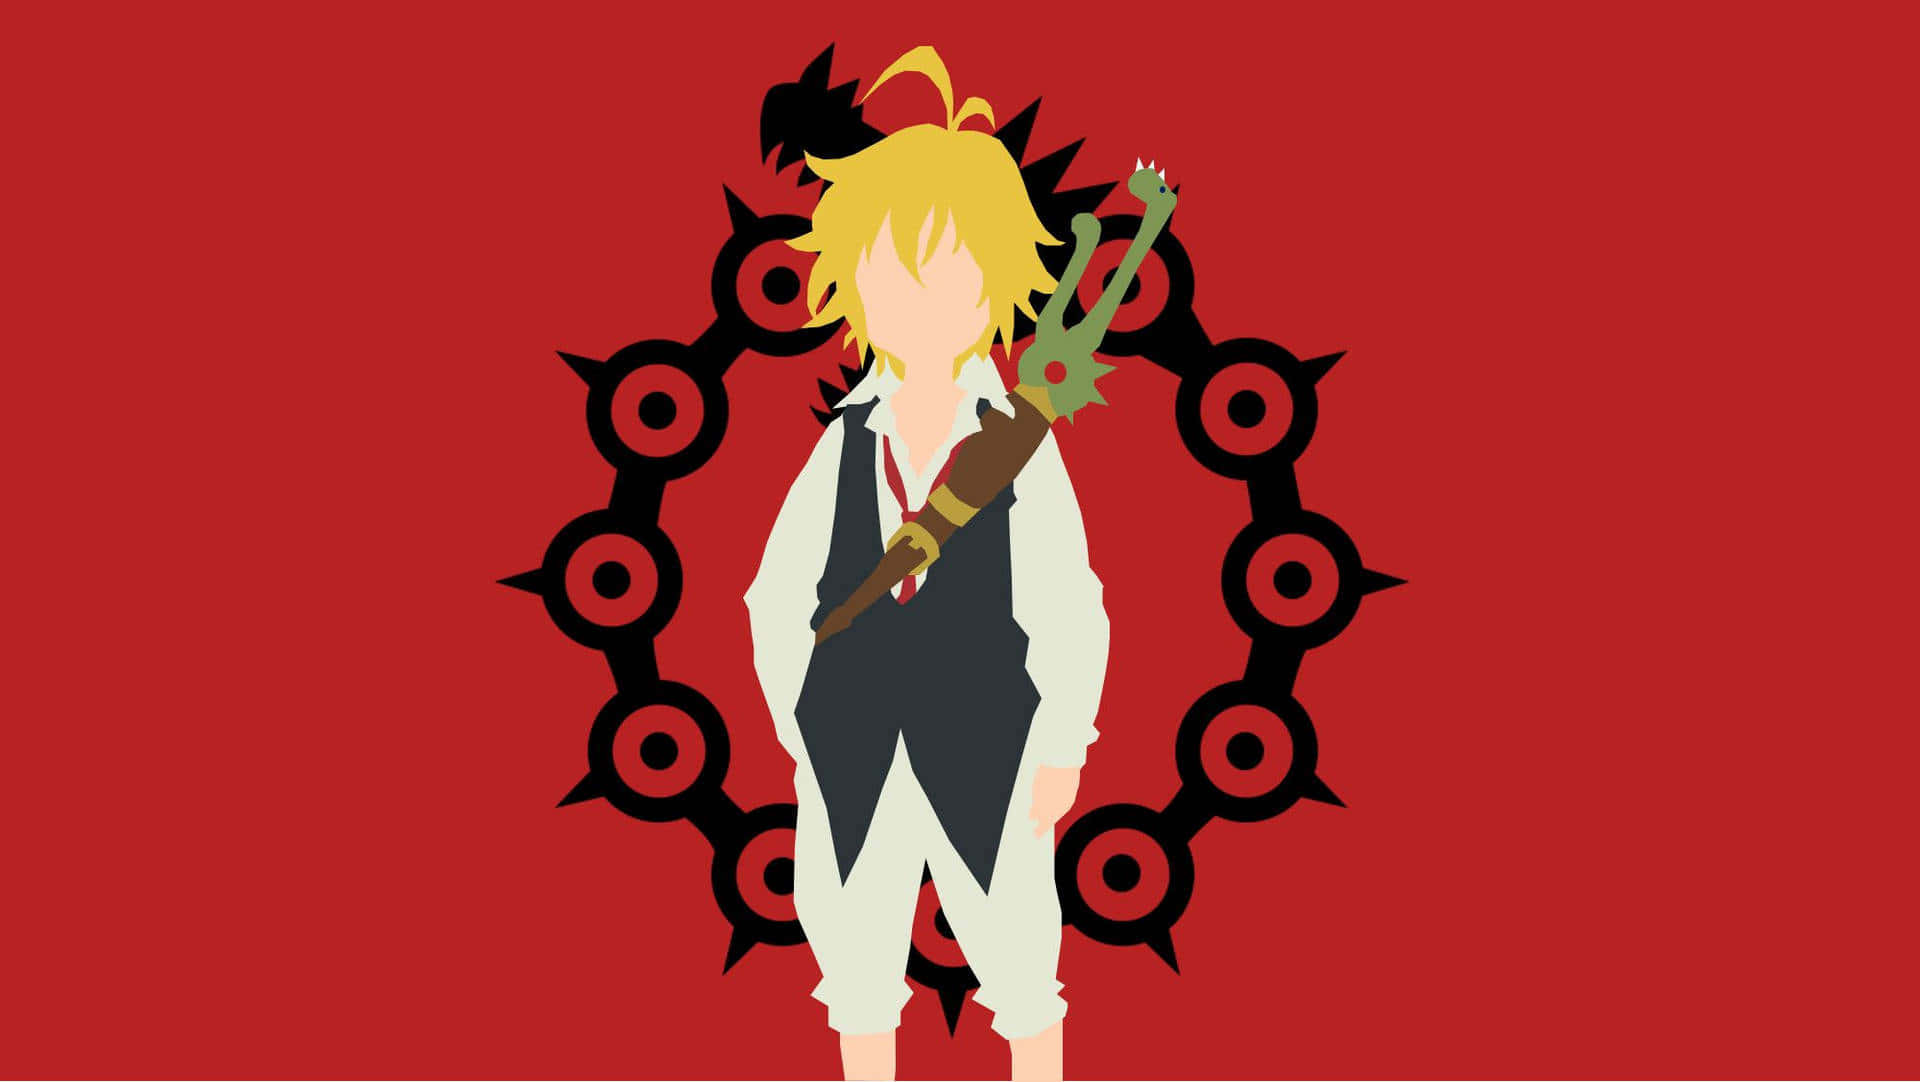 A Cartoon Character With A Sword And A Red Background